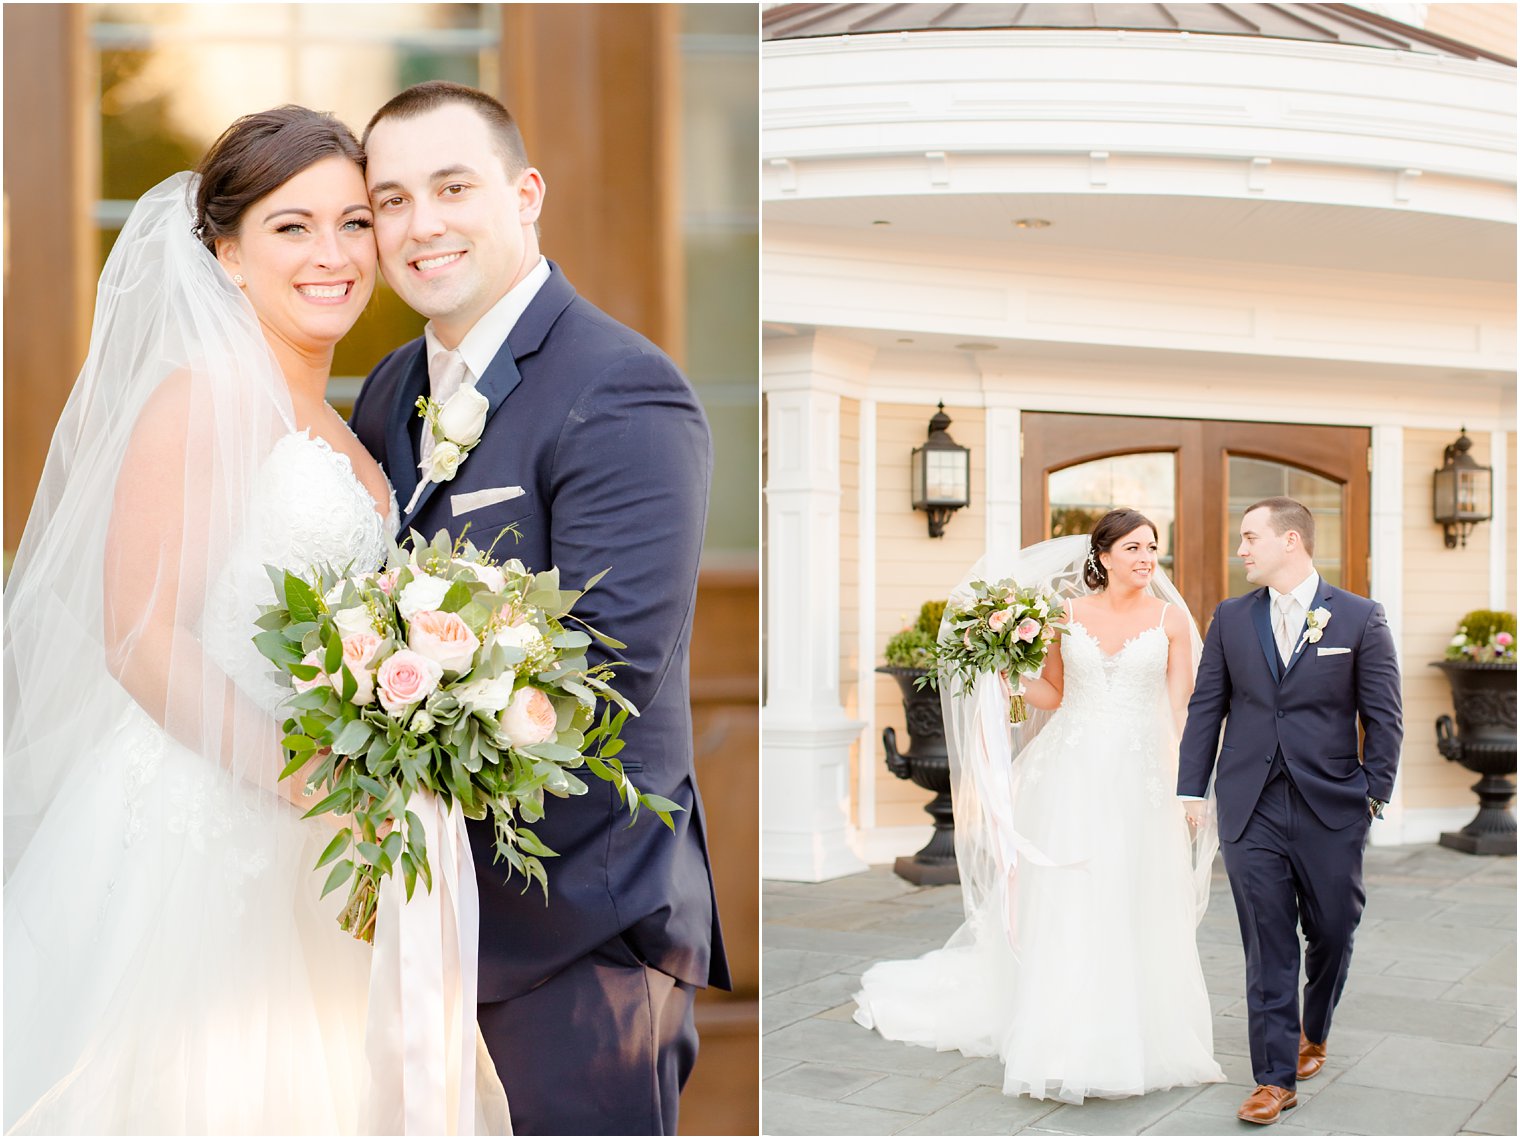 Classic bride and groom portraits at Clarks Landing Yacht Club